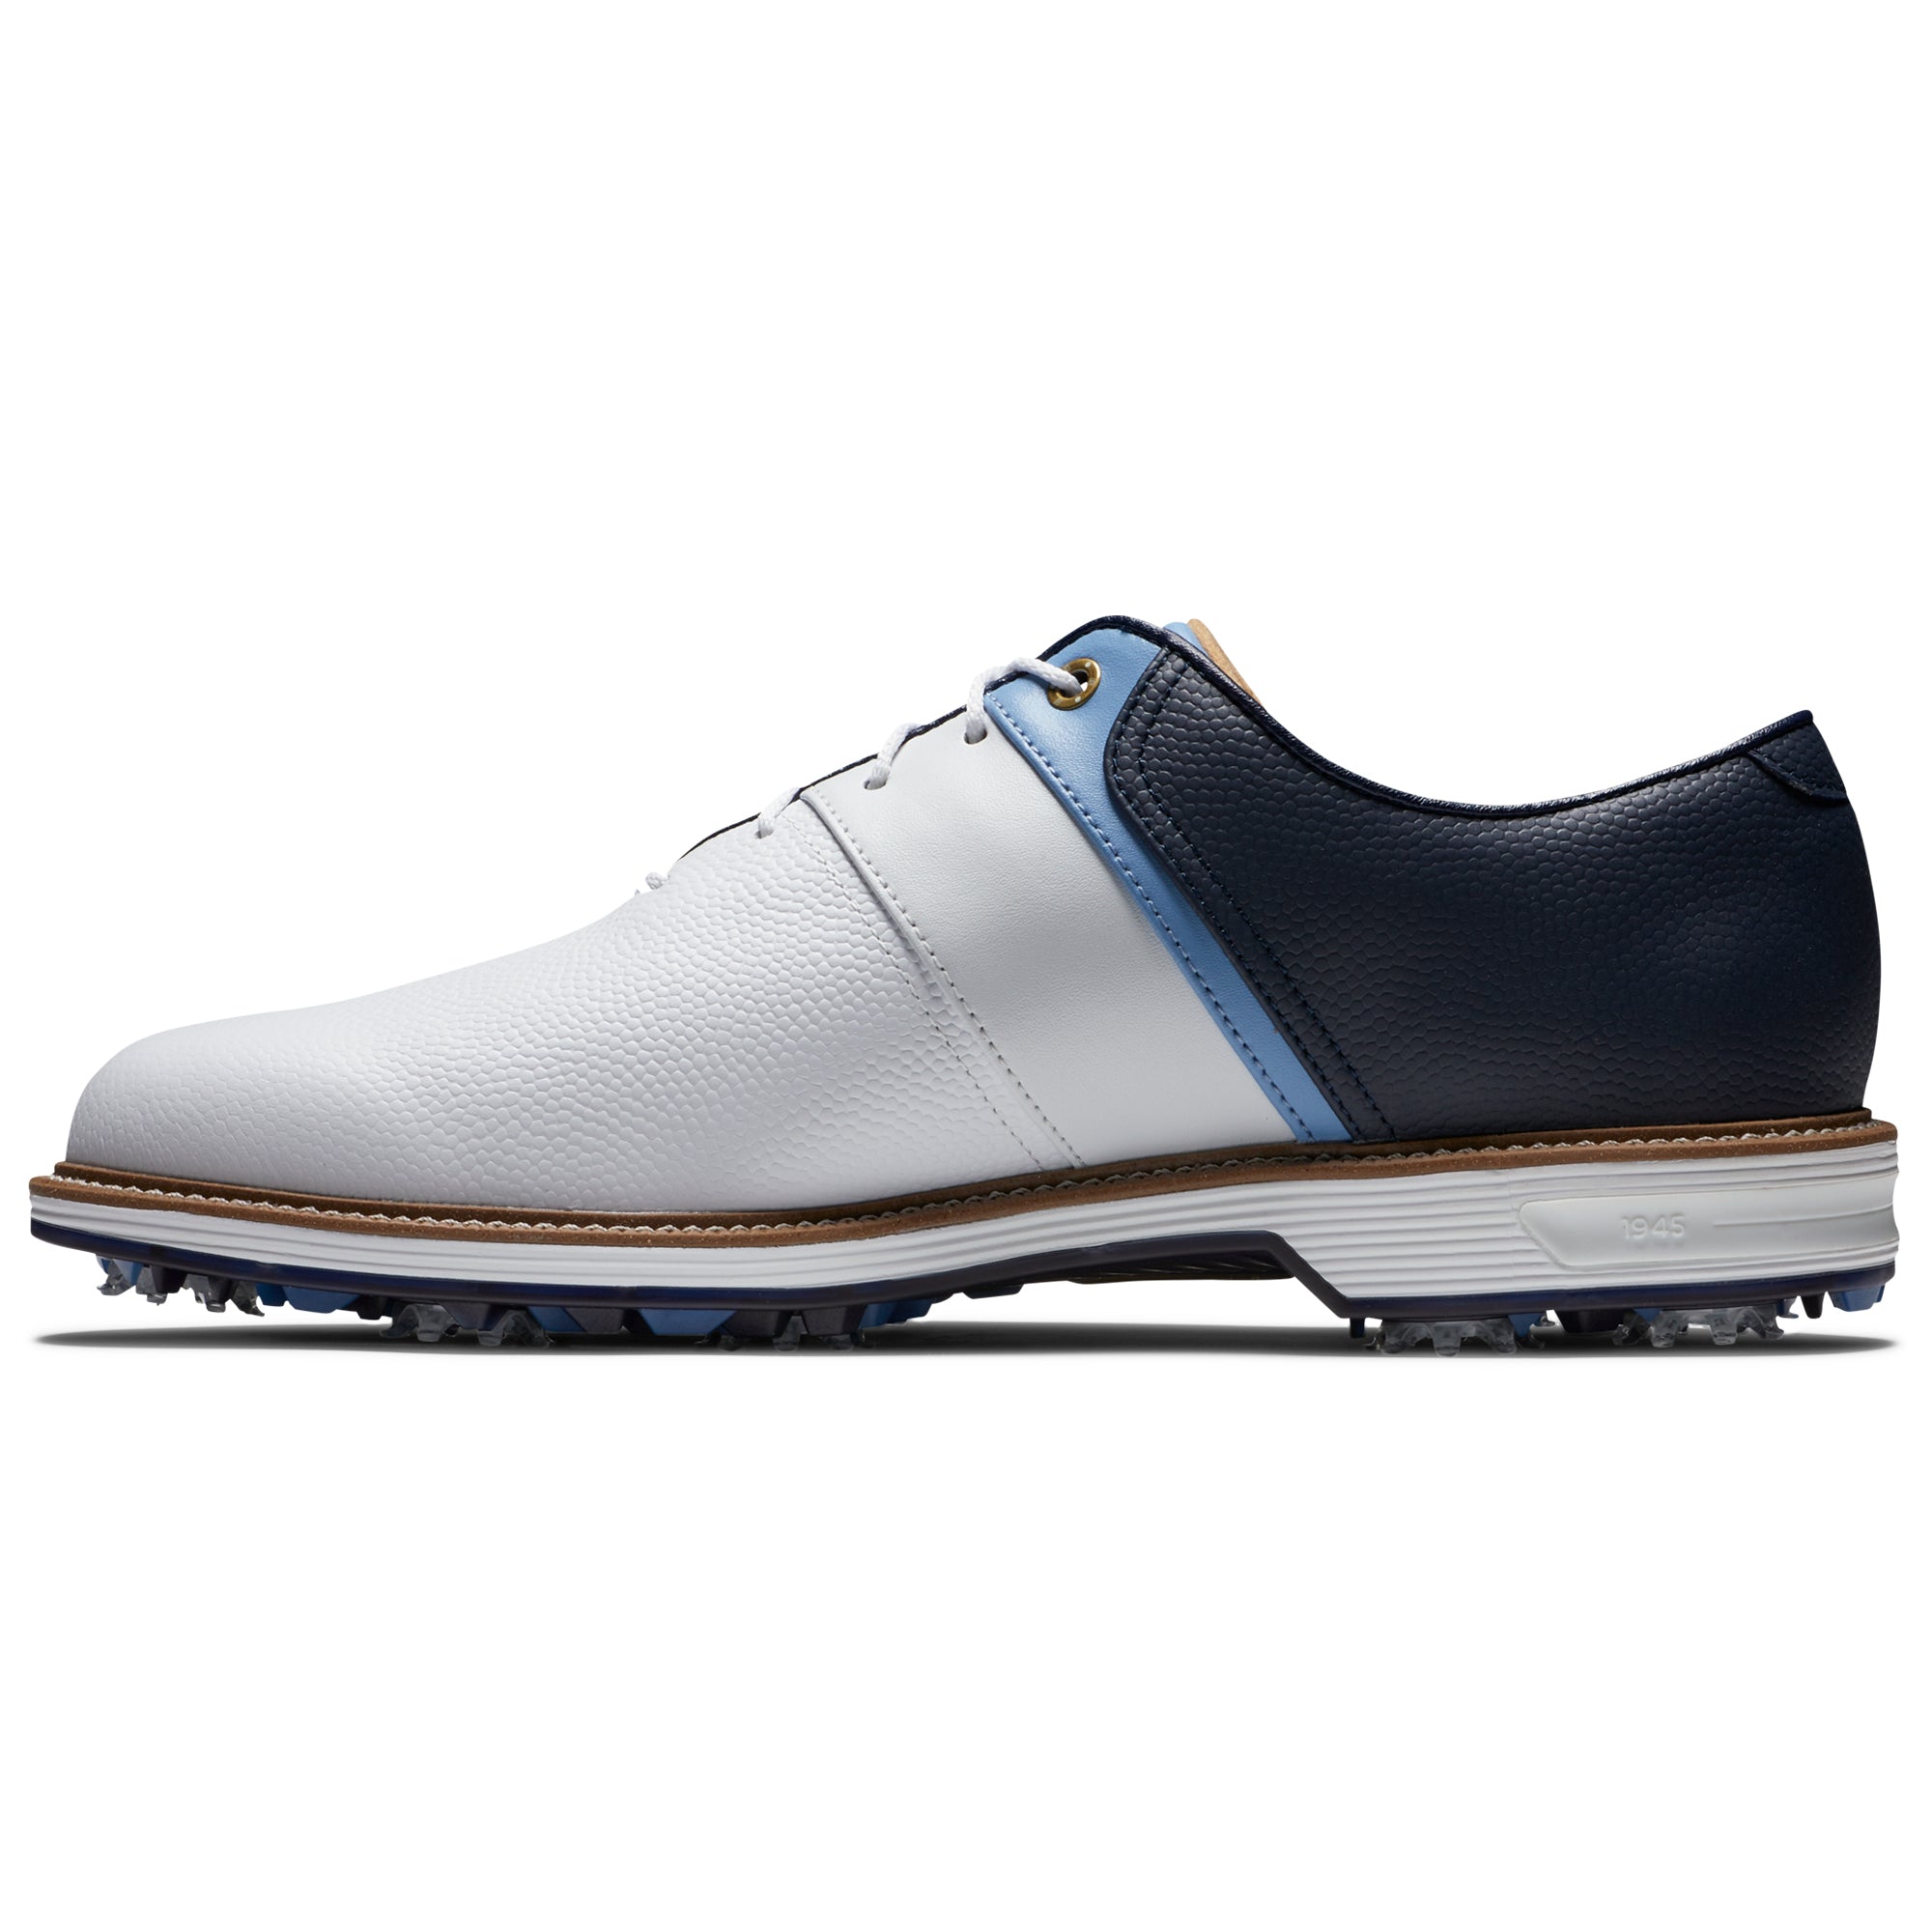 footjoy-premiere-series-packard-golf-shoes-54398-white-blue-navy